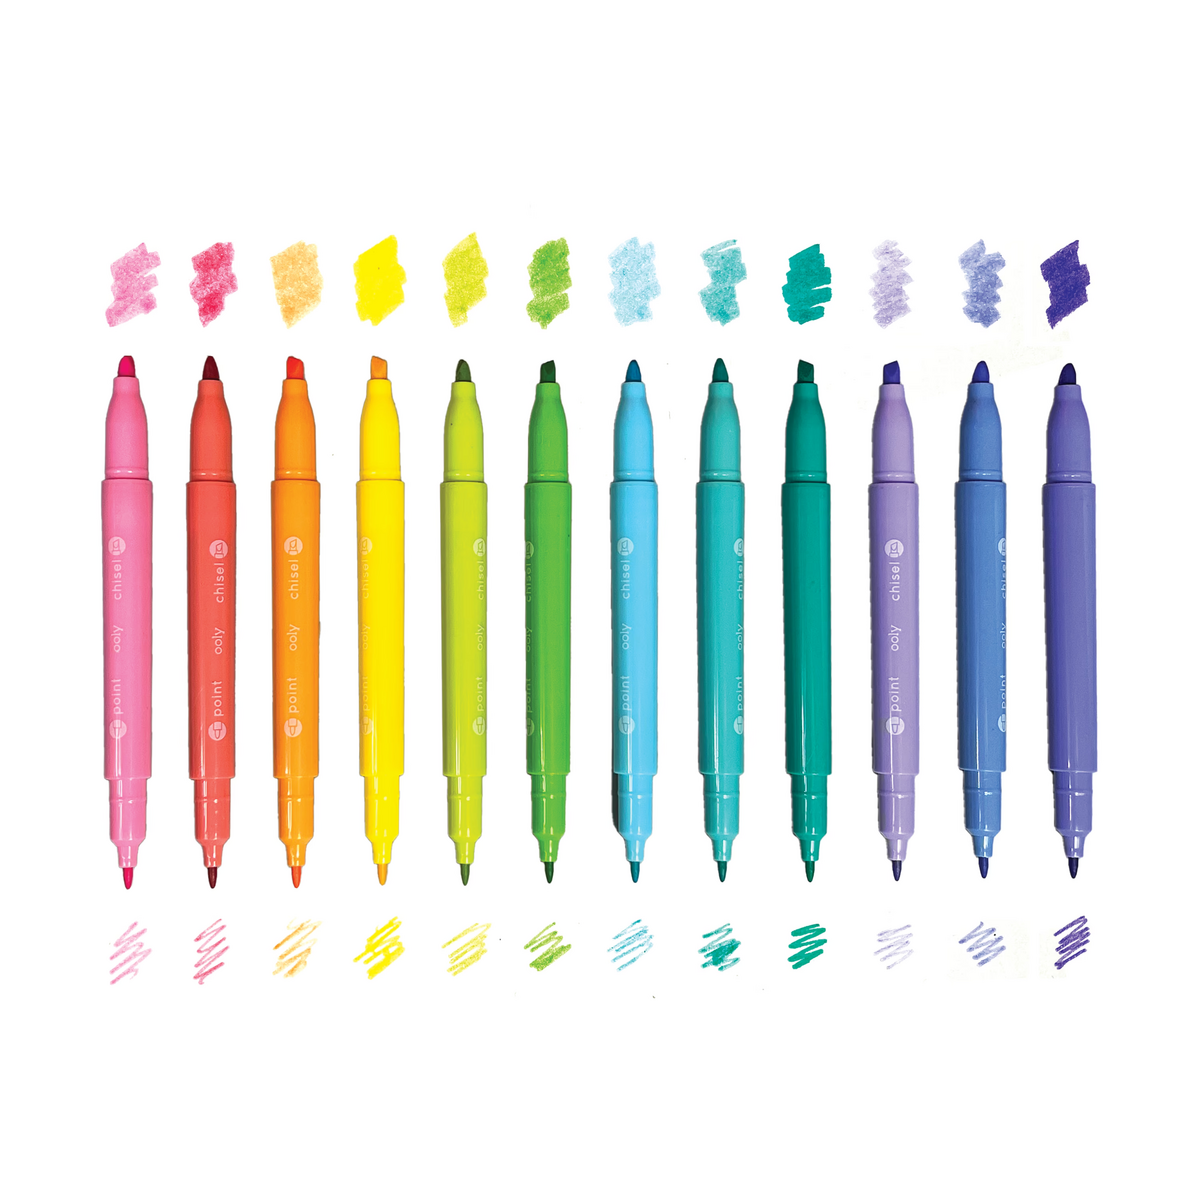 Ooly pastel hues coloured pencils set of 12 – Dilly Dally Kids